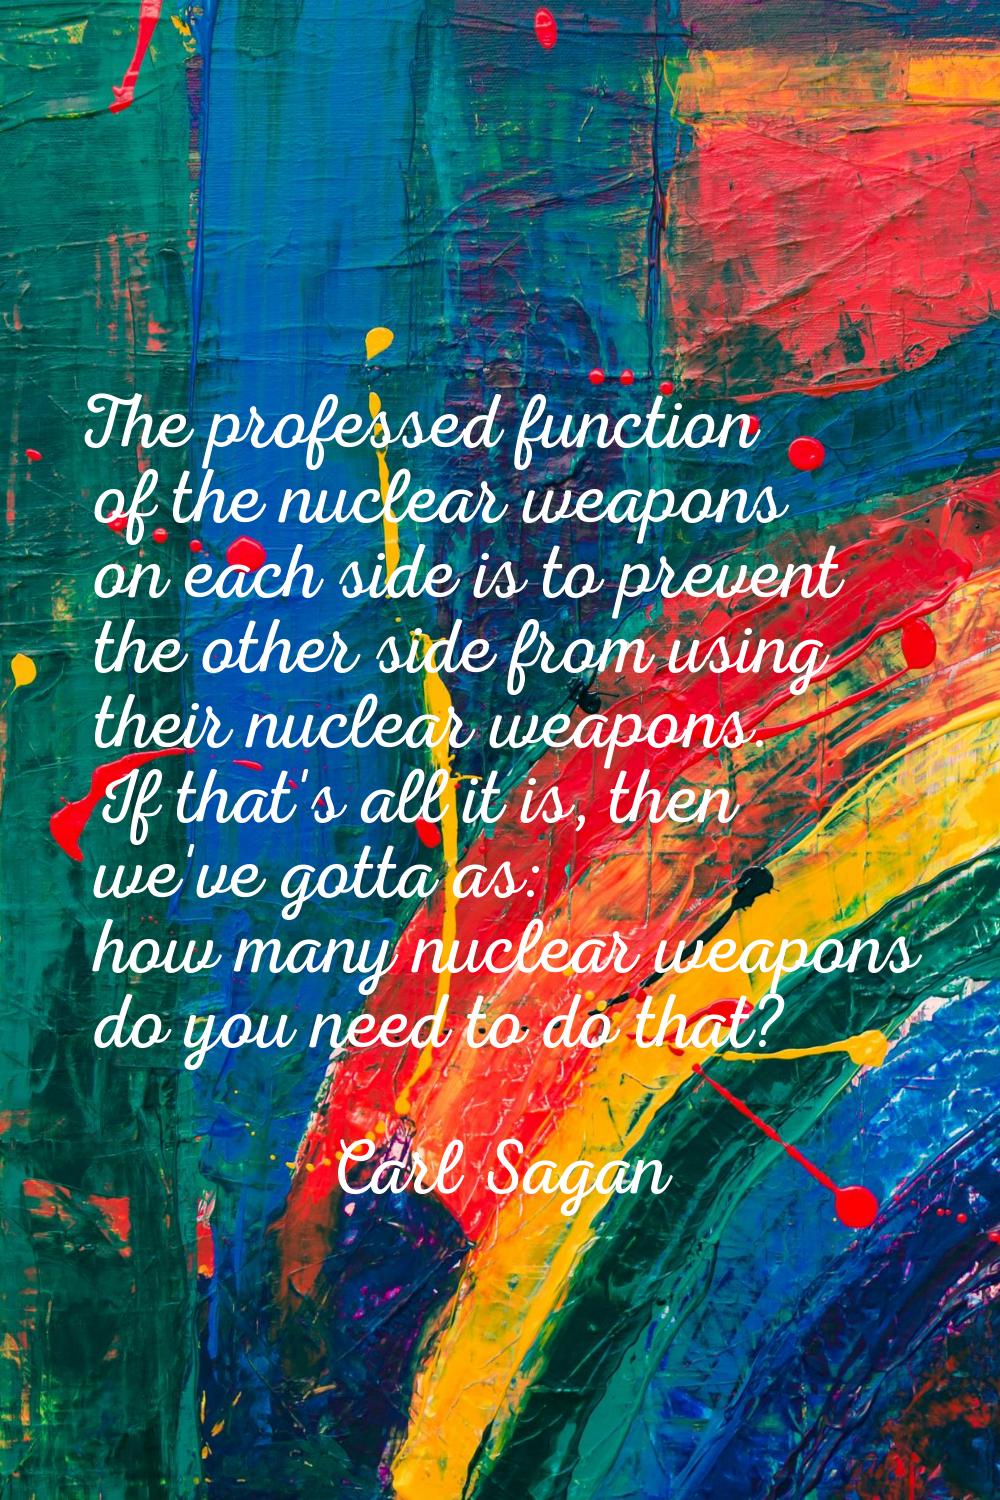 The professed function of the nuclear weapons on each side is to prevent the other side from using 